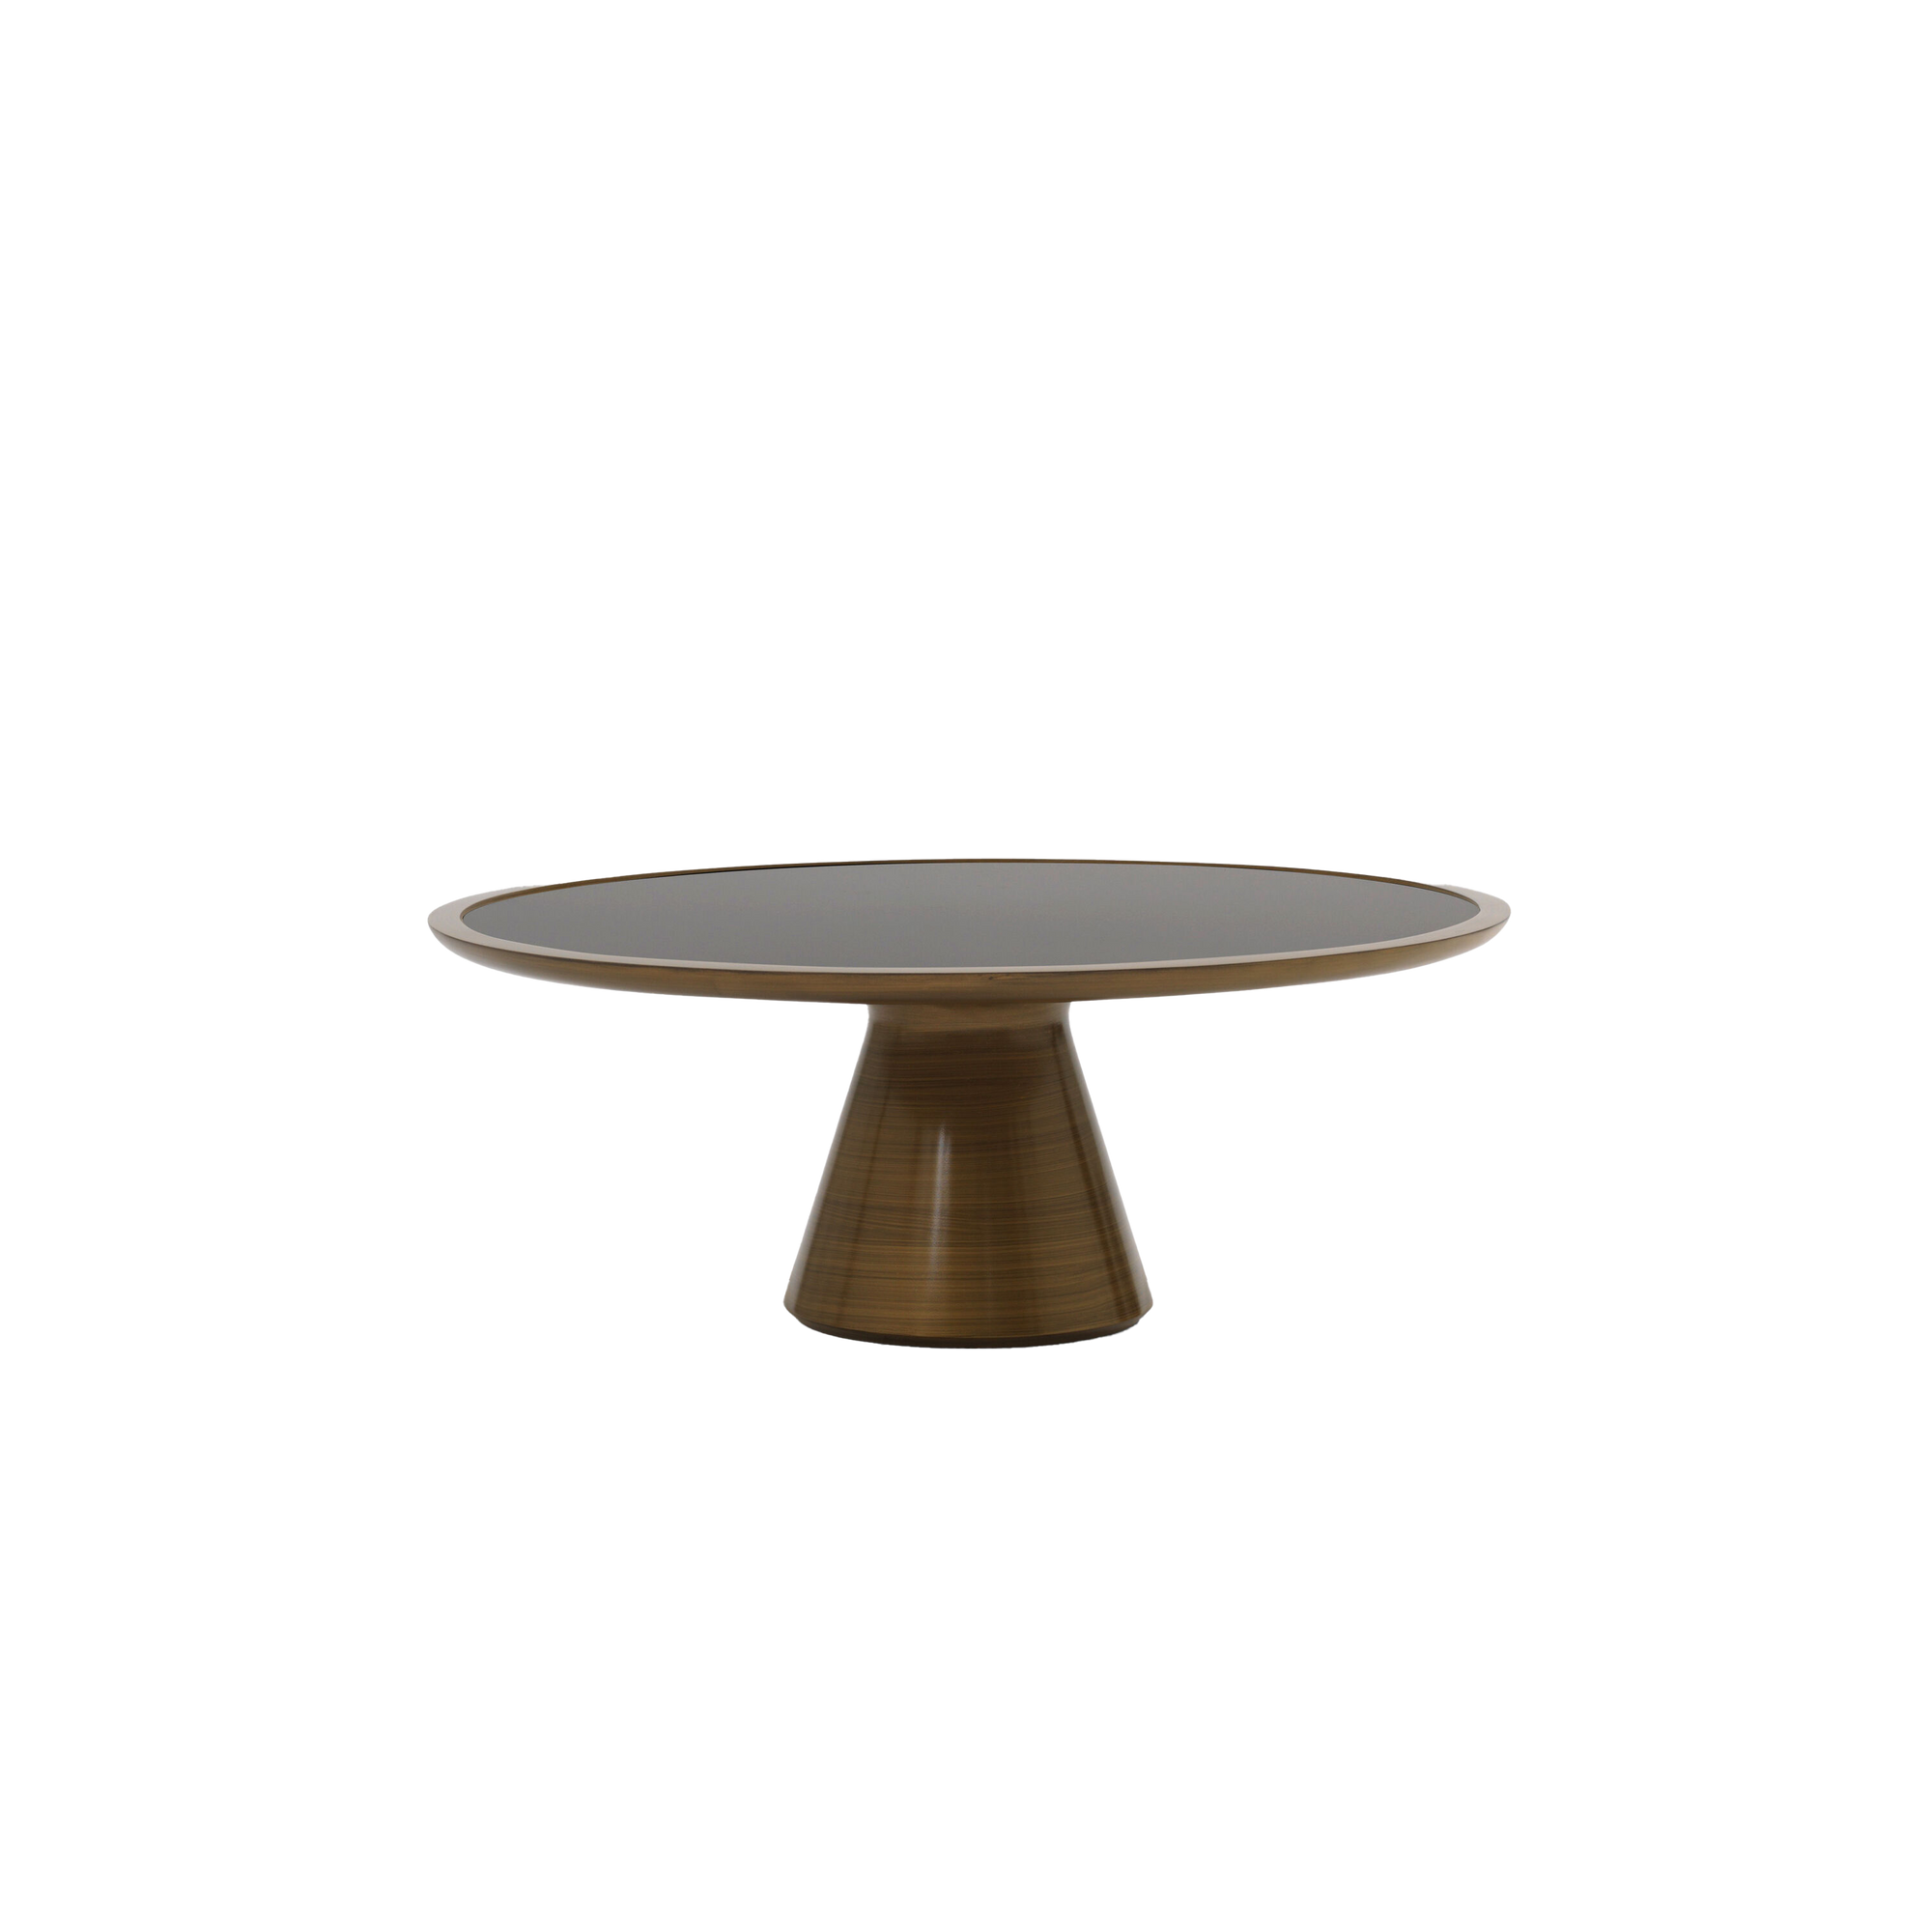 Simply elegant, the Taper Coffee Table is a chic sculptural centerpiece.